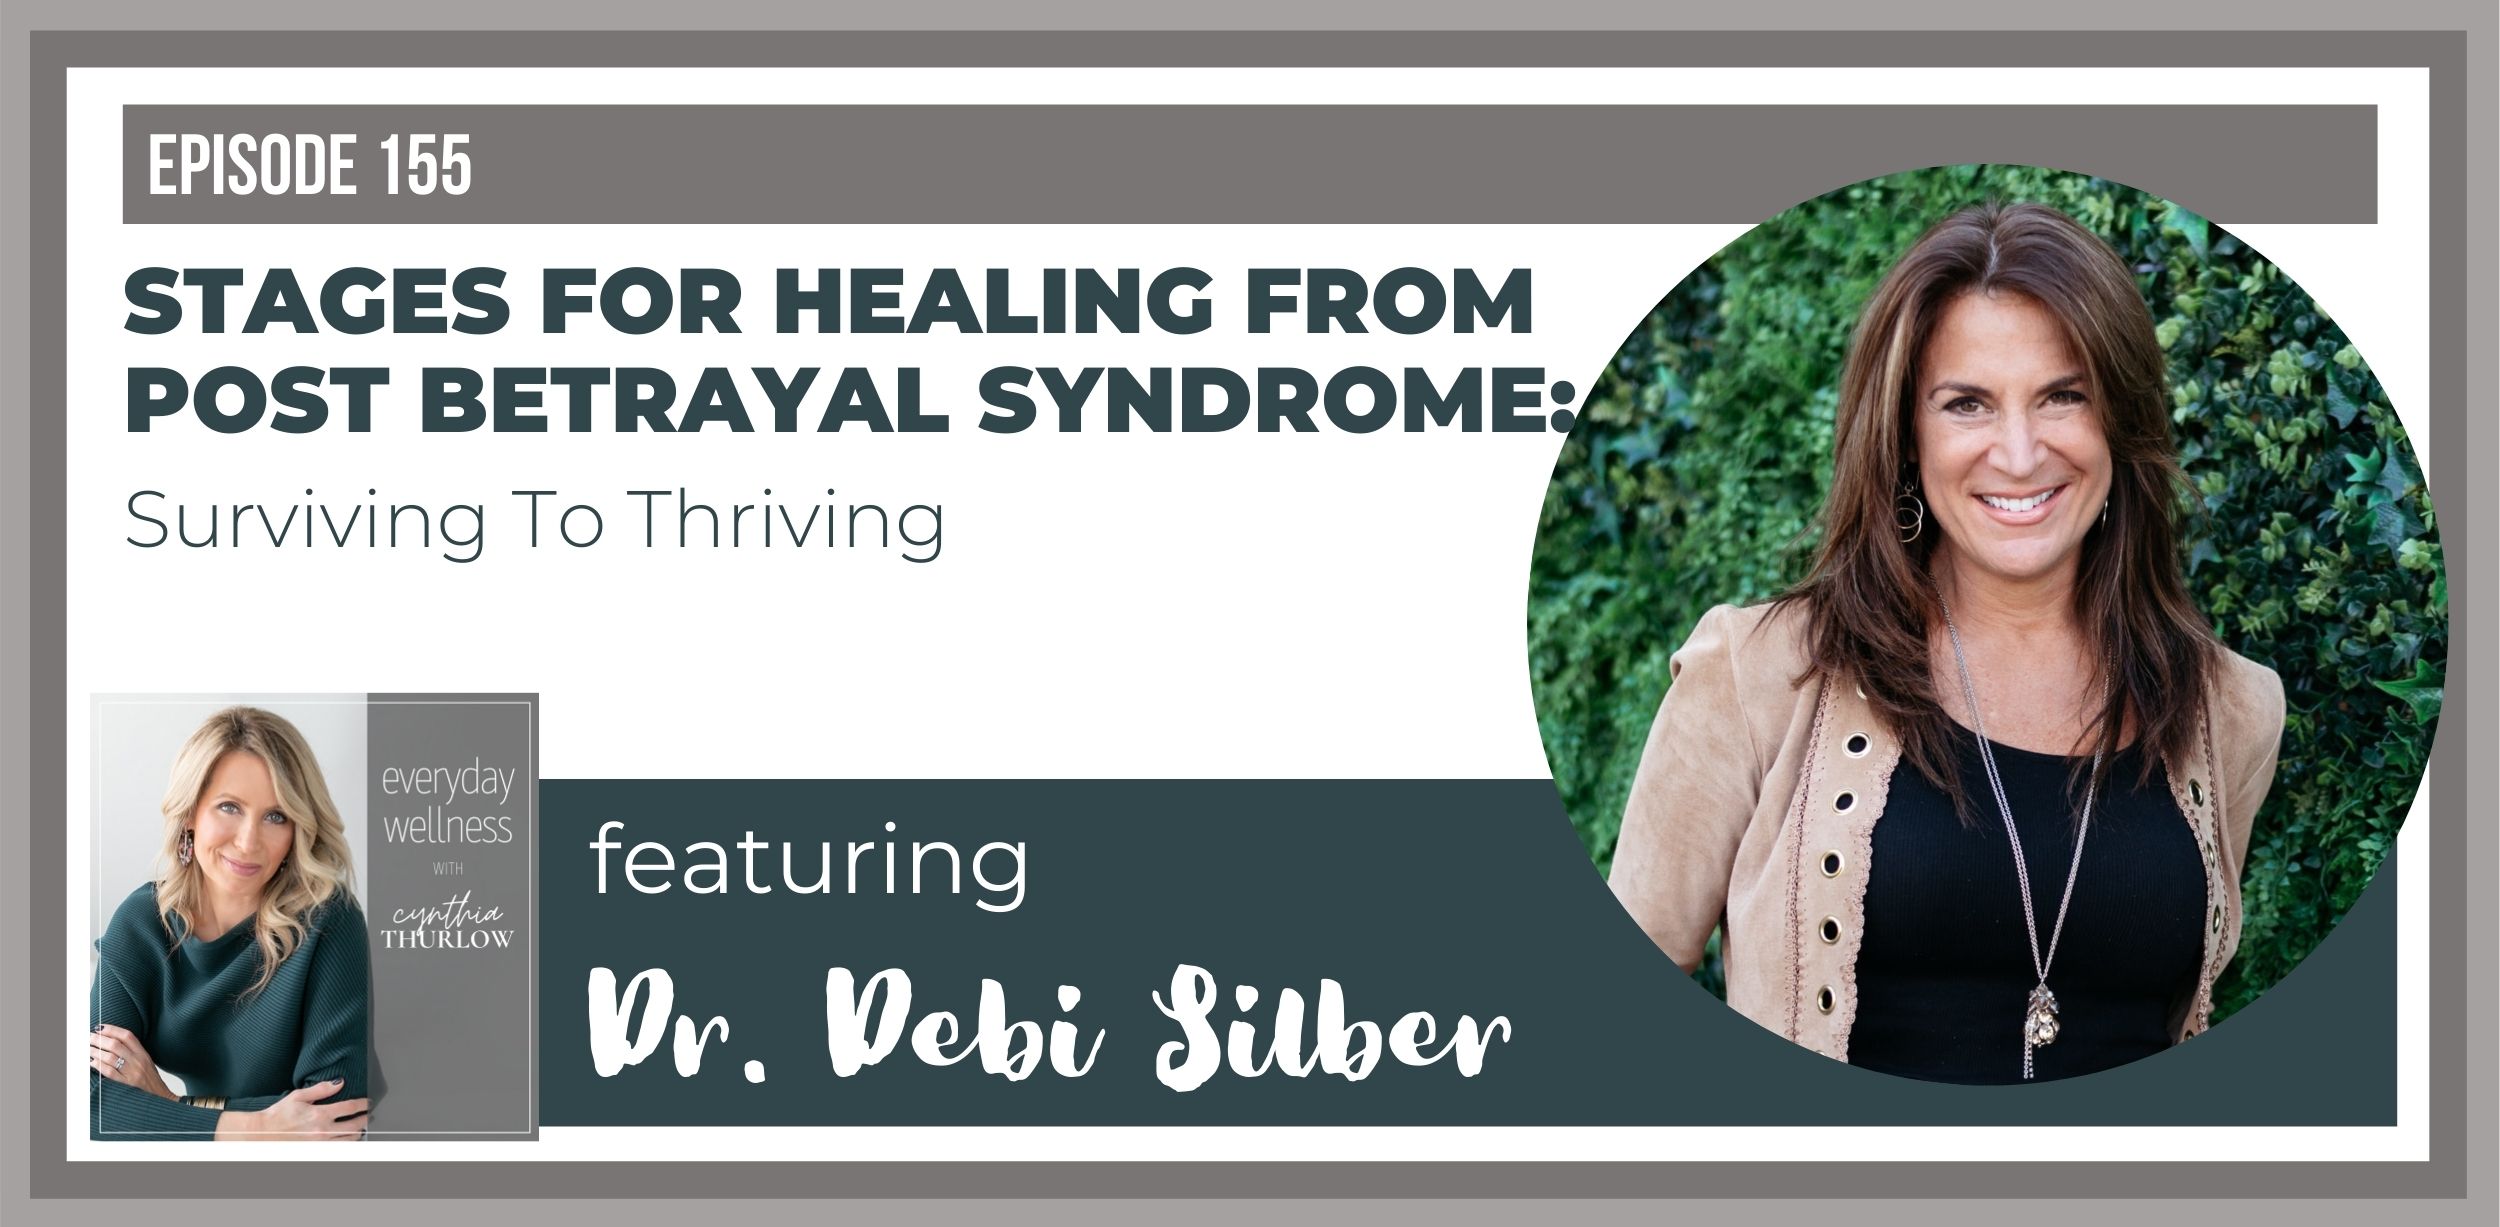 Dr. Debi Silber on Everyday Wellness Podcast with Cynthia Thurlow